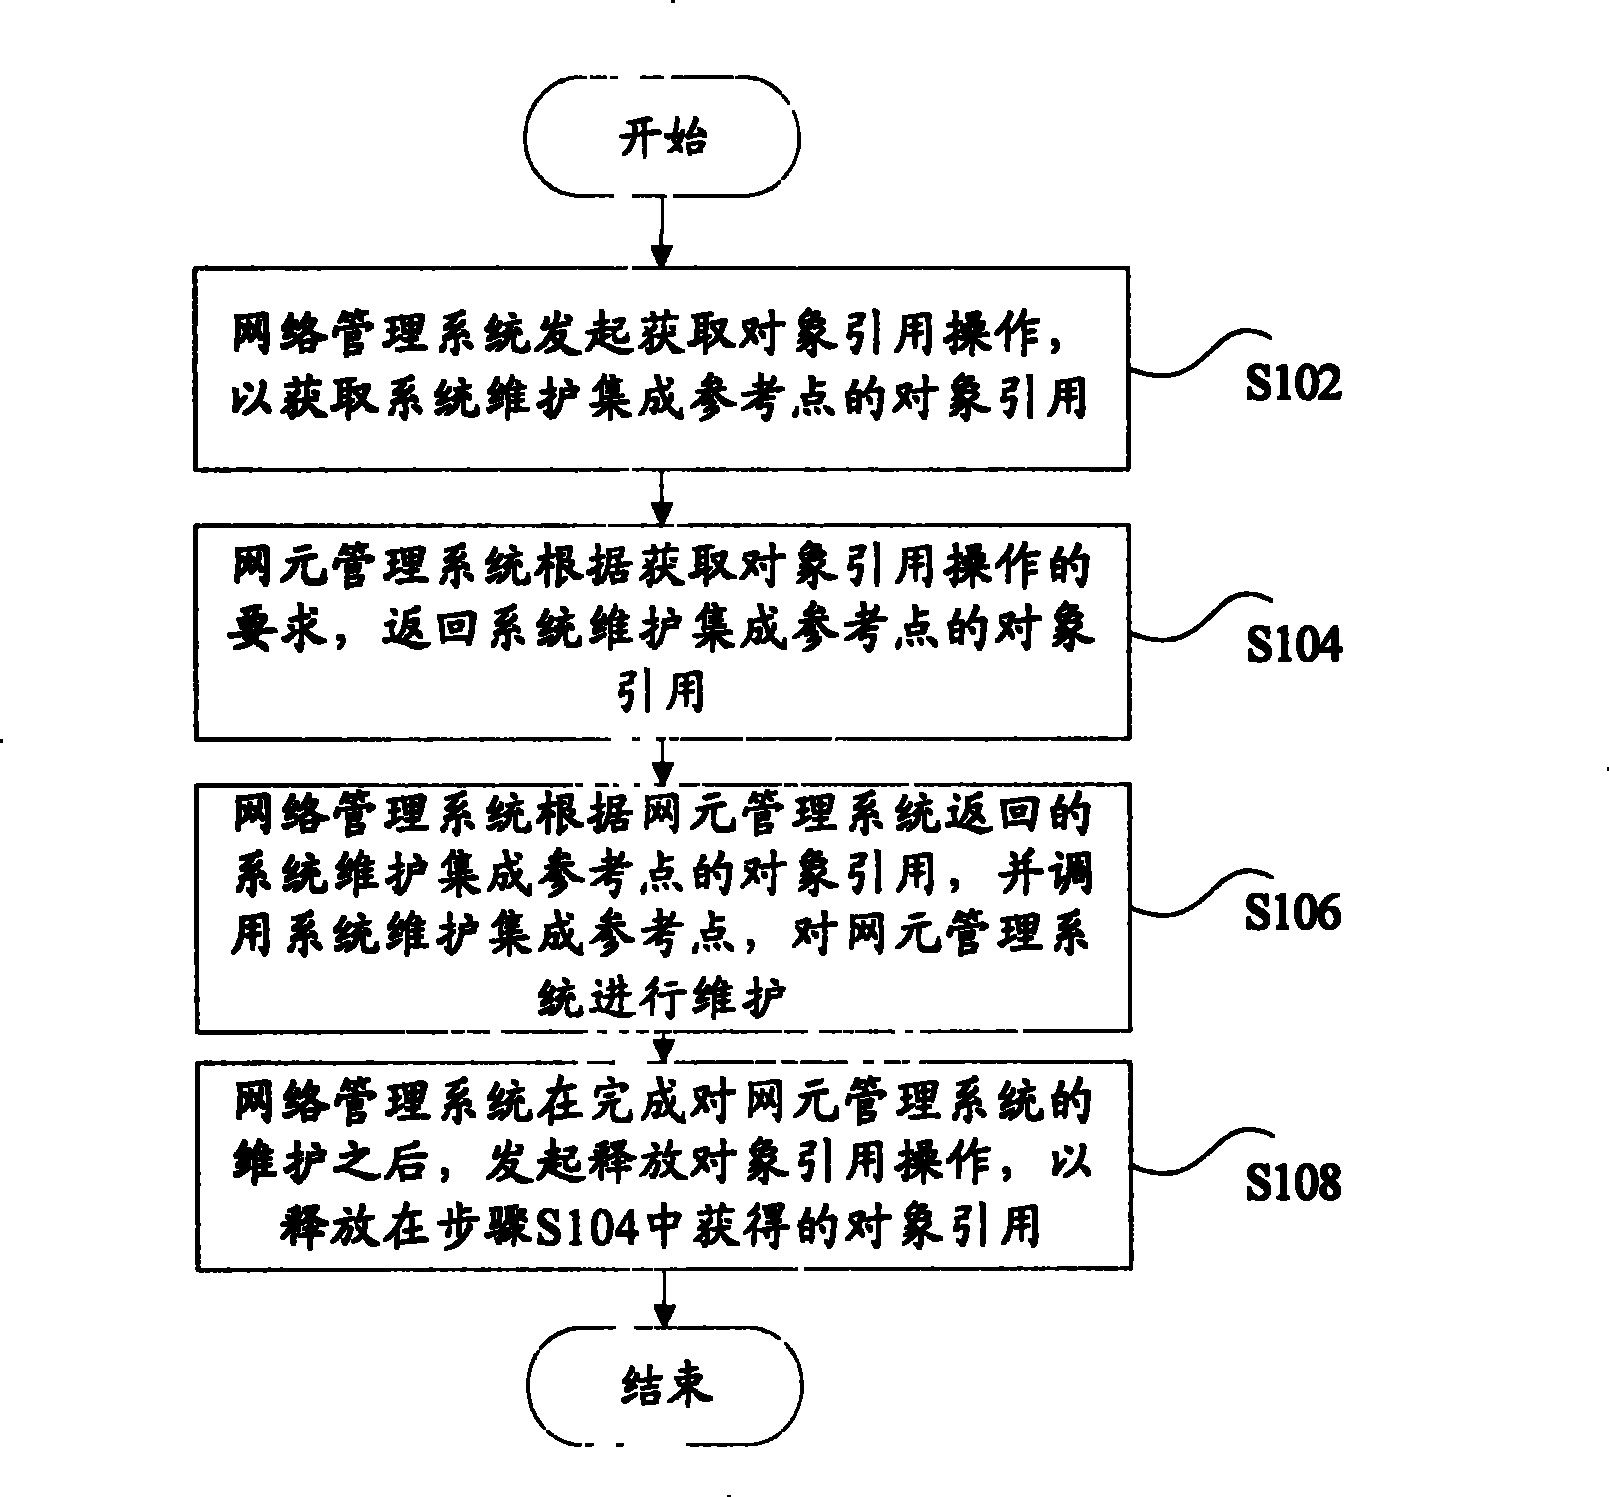 Method and apparatus for system maintenance